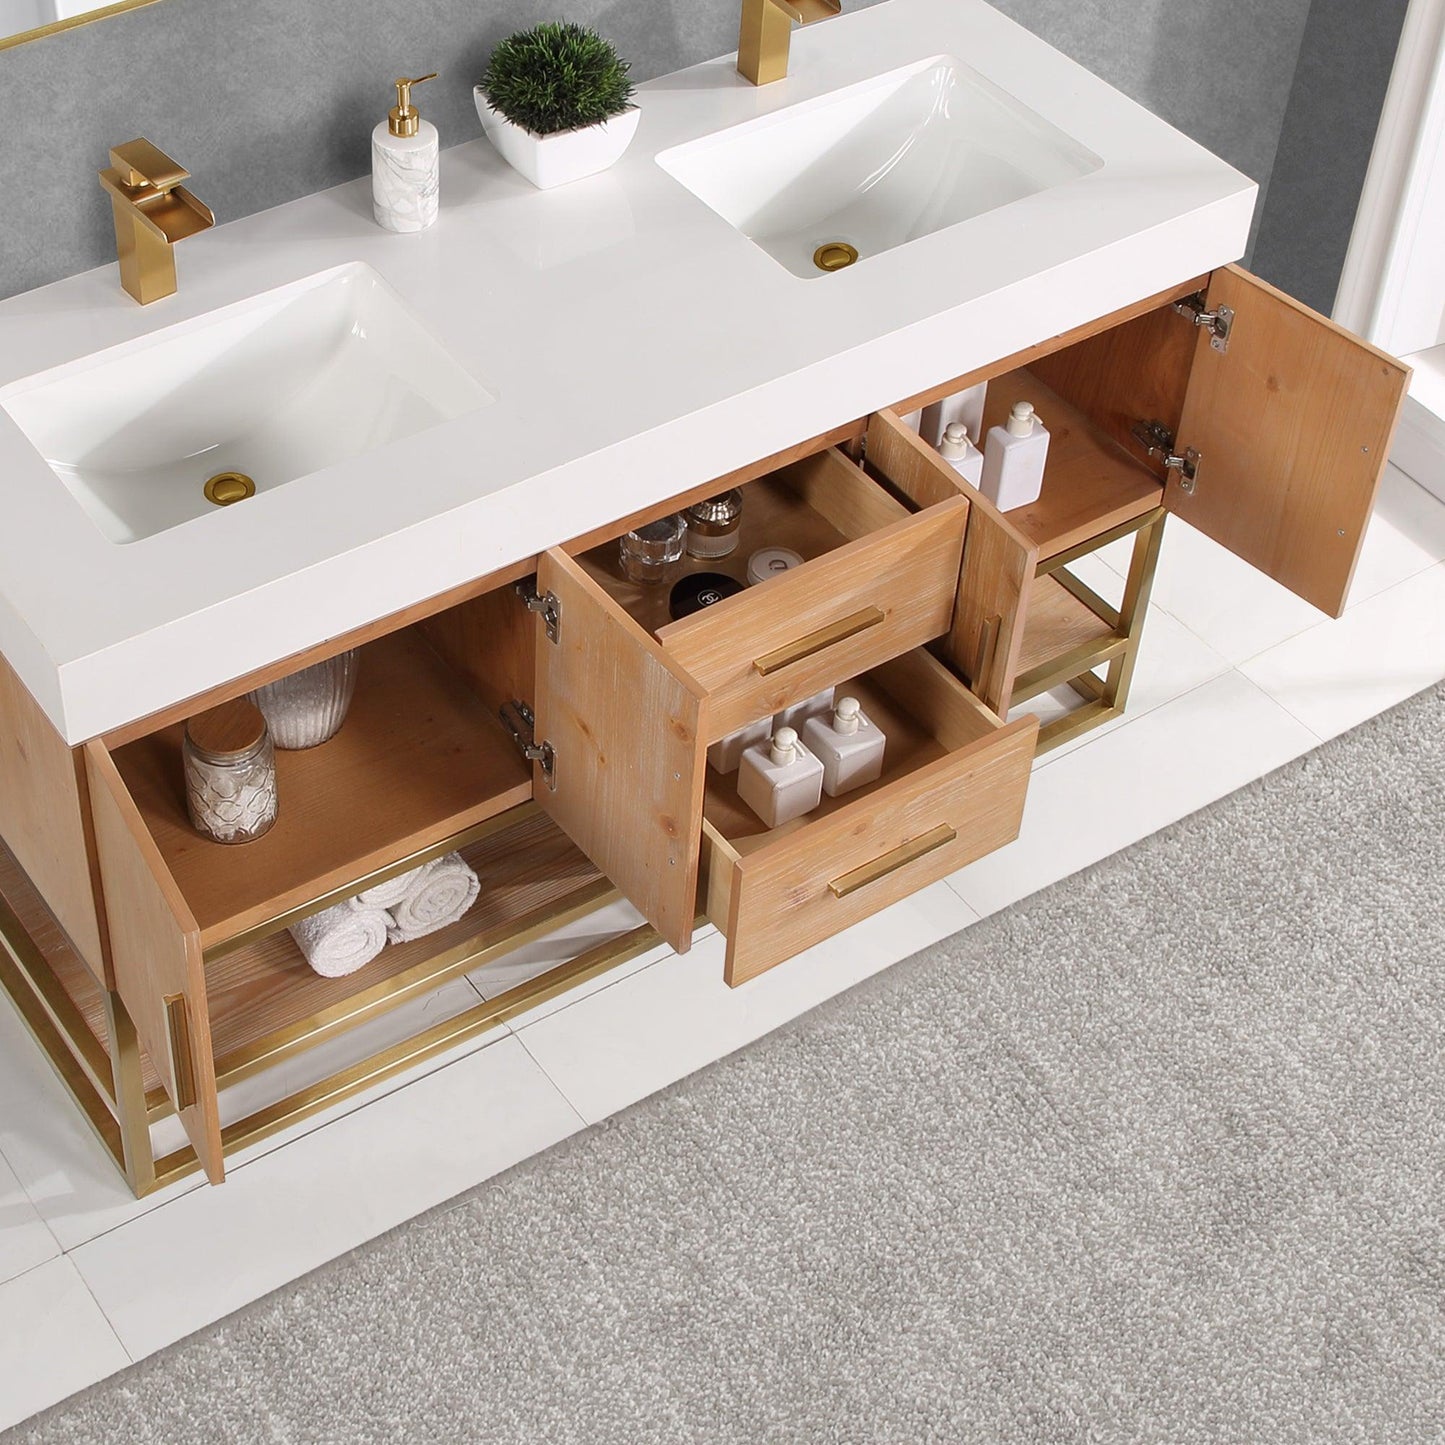 Altair Bianco Double Bathroom Vanity in Light Brown with White Composite Stone Countertop and Optional Mirror - Sea & Stone Bath